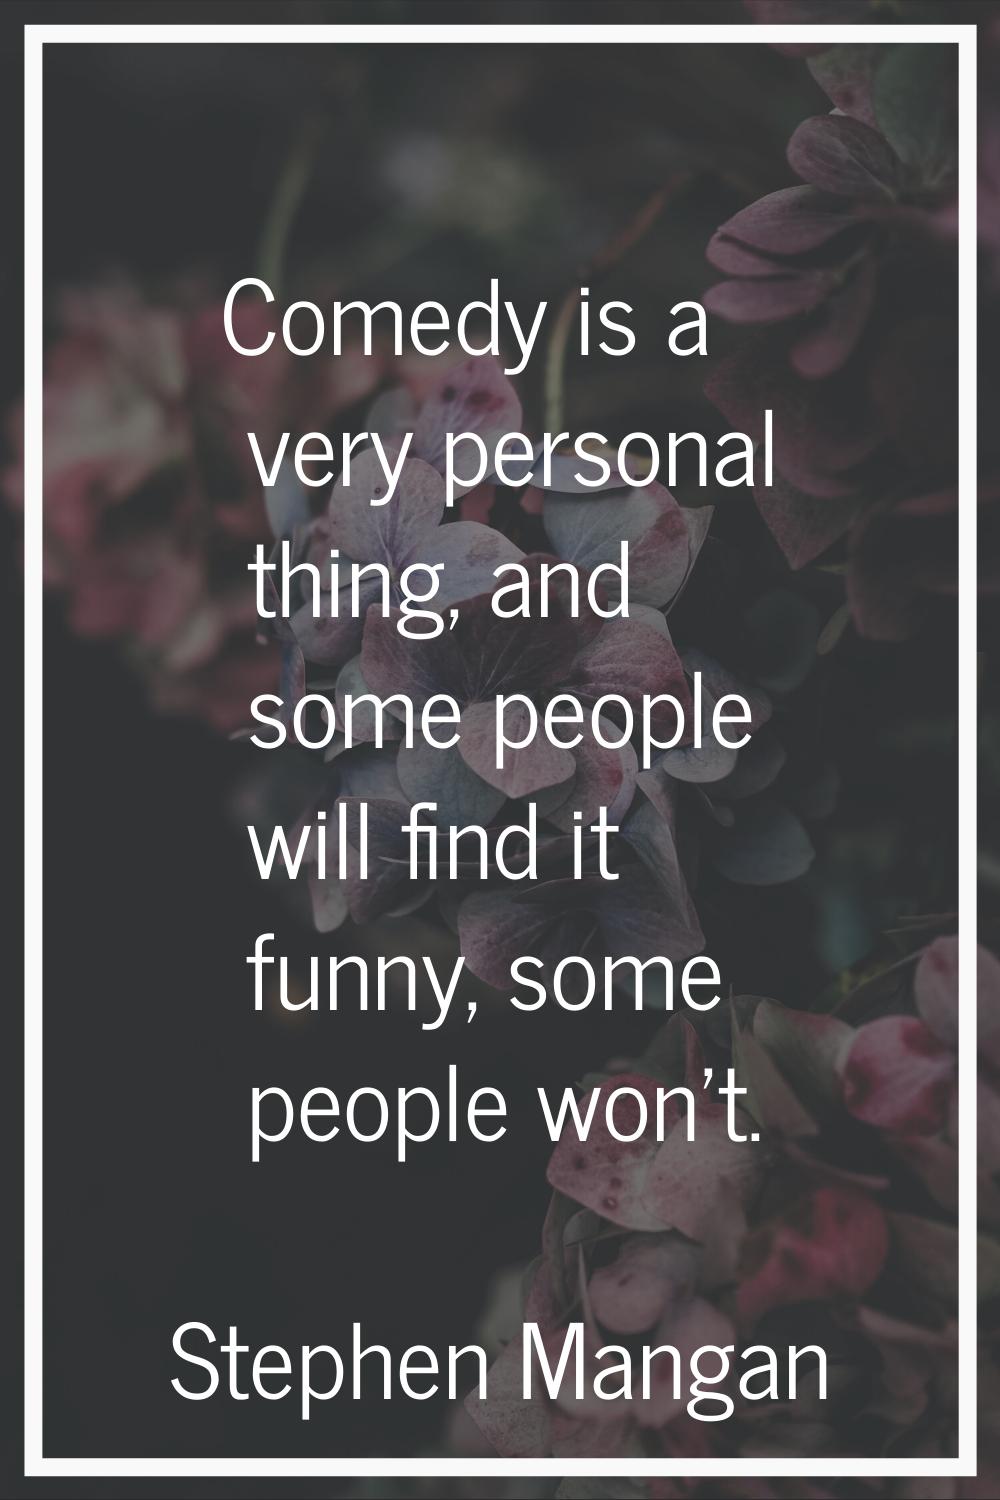 Comedy is a very personal thing, and some people will find it funny, some people won't.